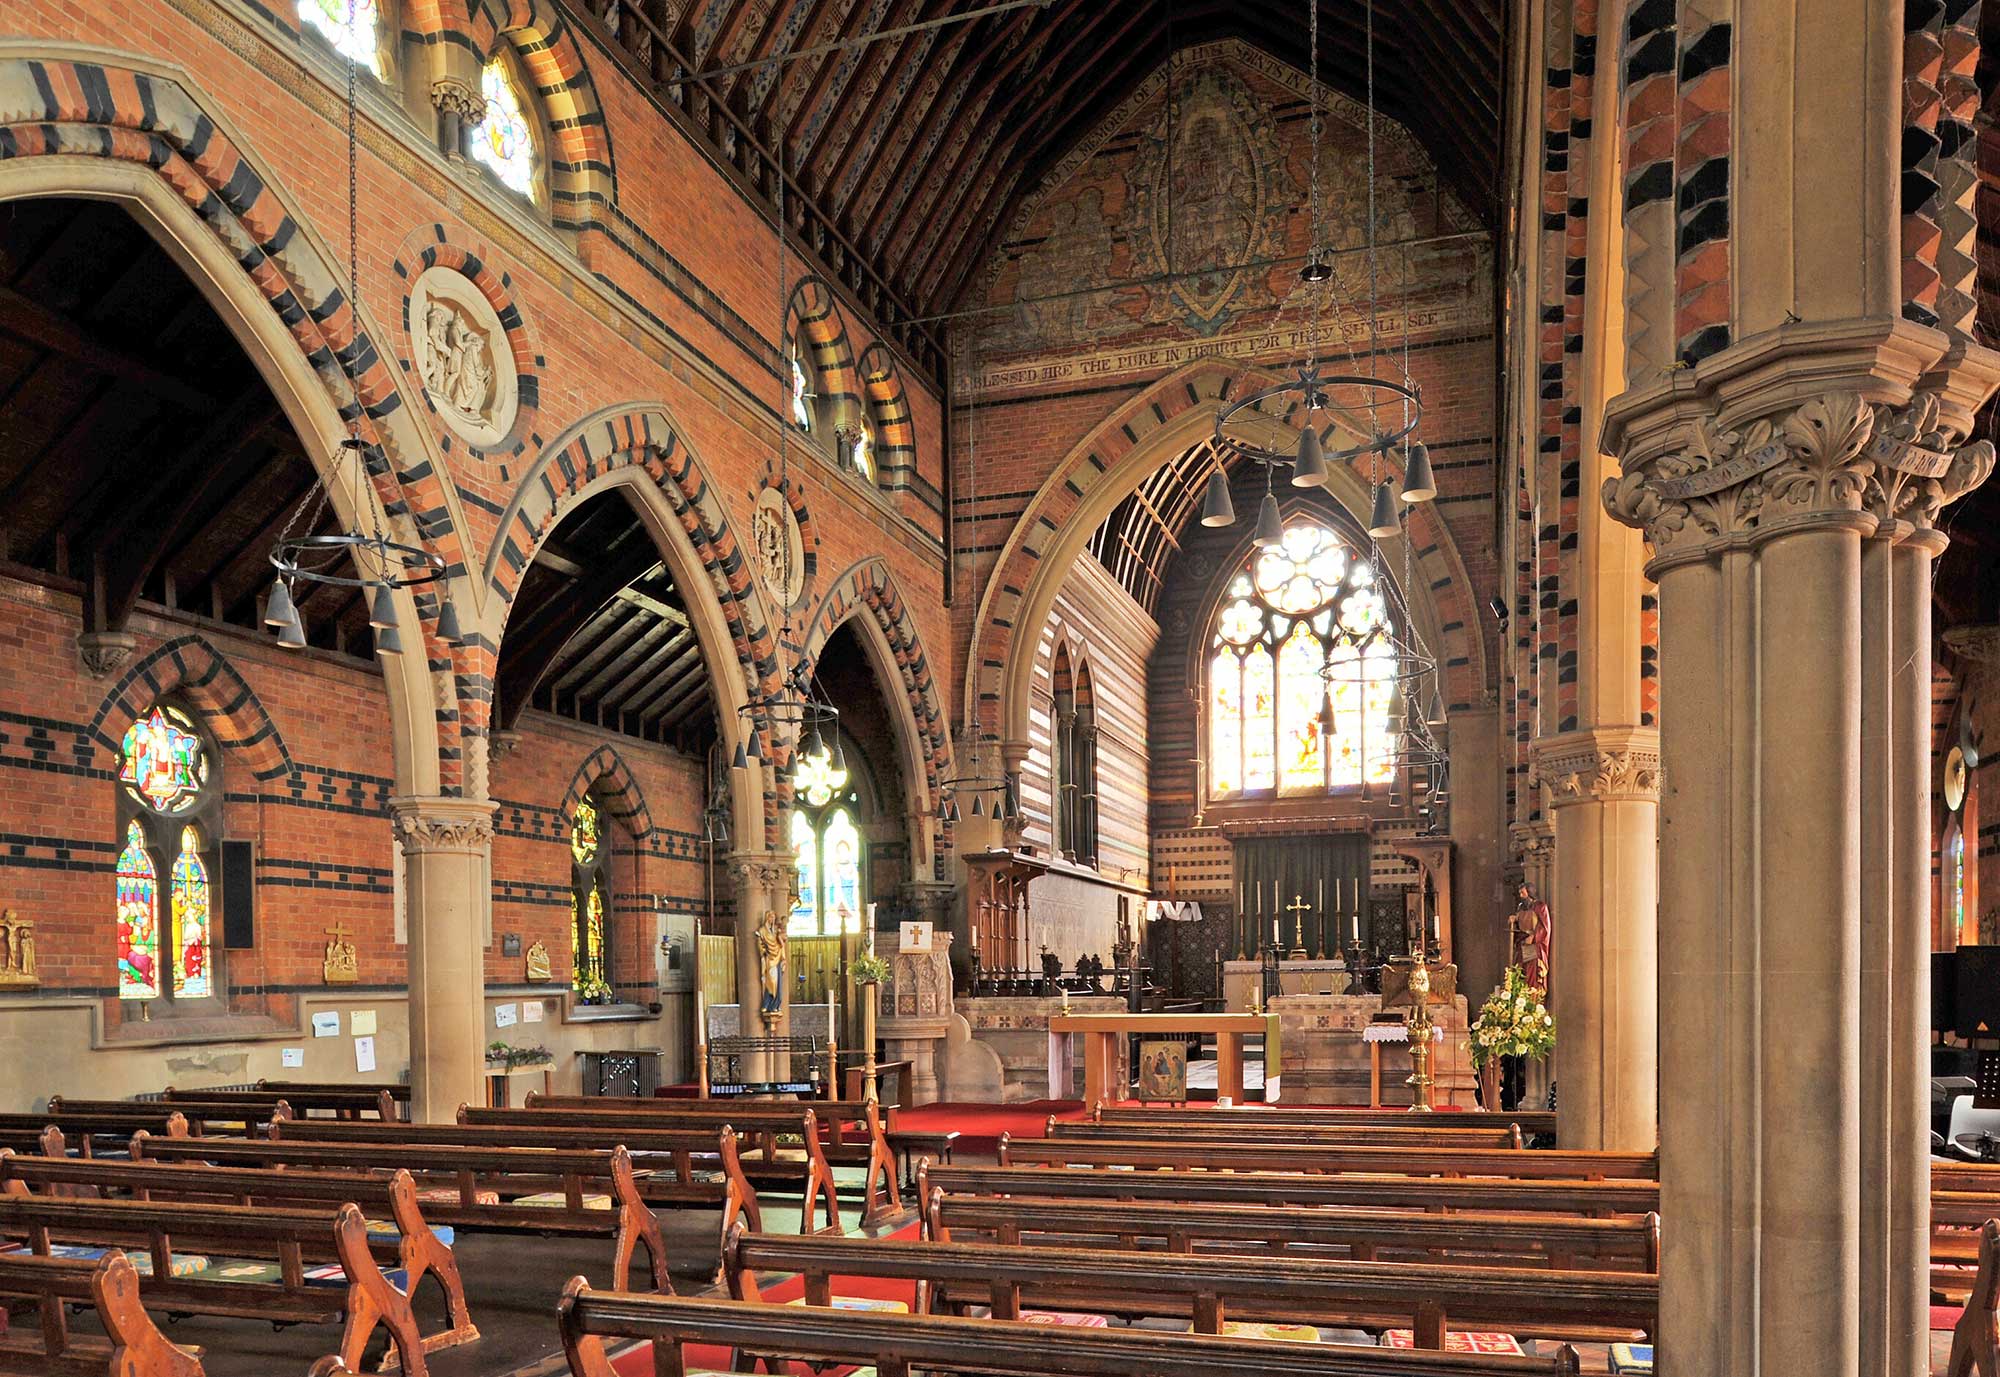 The interior of a church where the arches are composed of patterns of white stone and red and black bricks and the walls with red and black bricks.